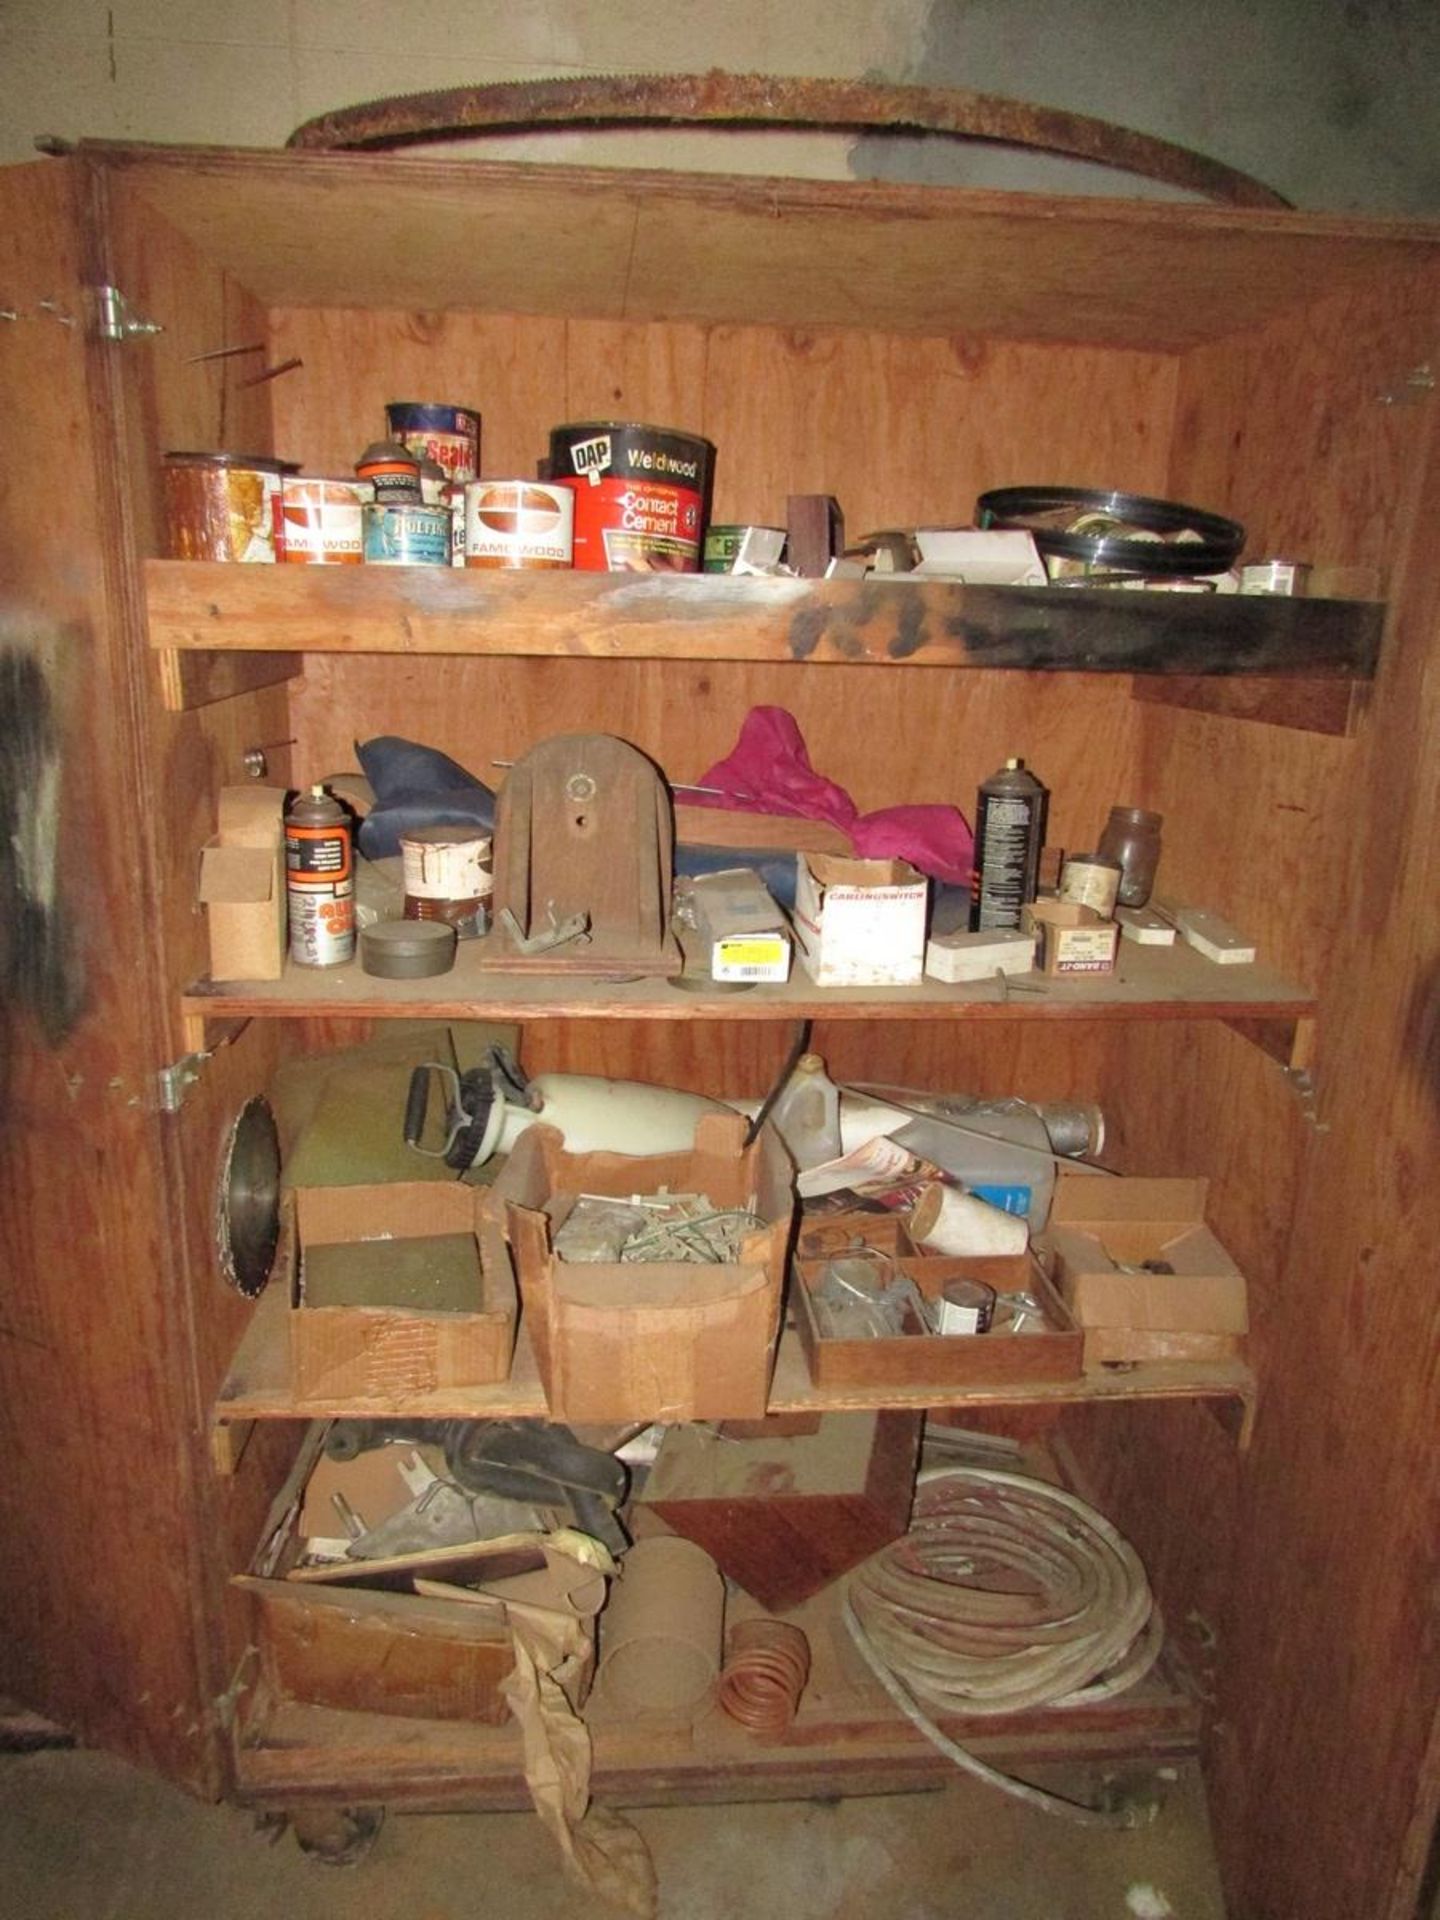 Remaining Contents of Woodshop, To Include 2- Door Cabinets, Adjustable Shelving Units, Wood